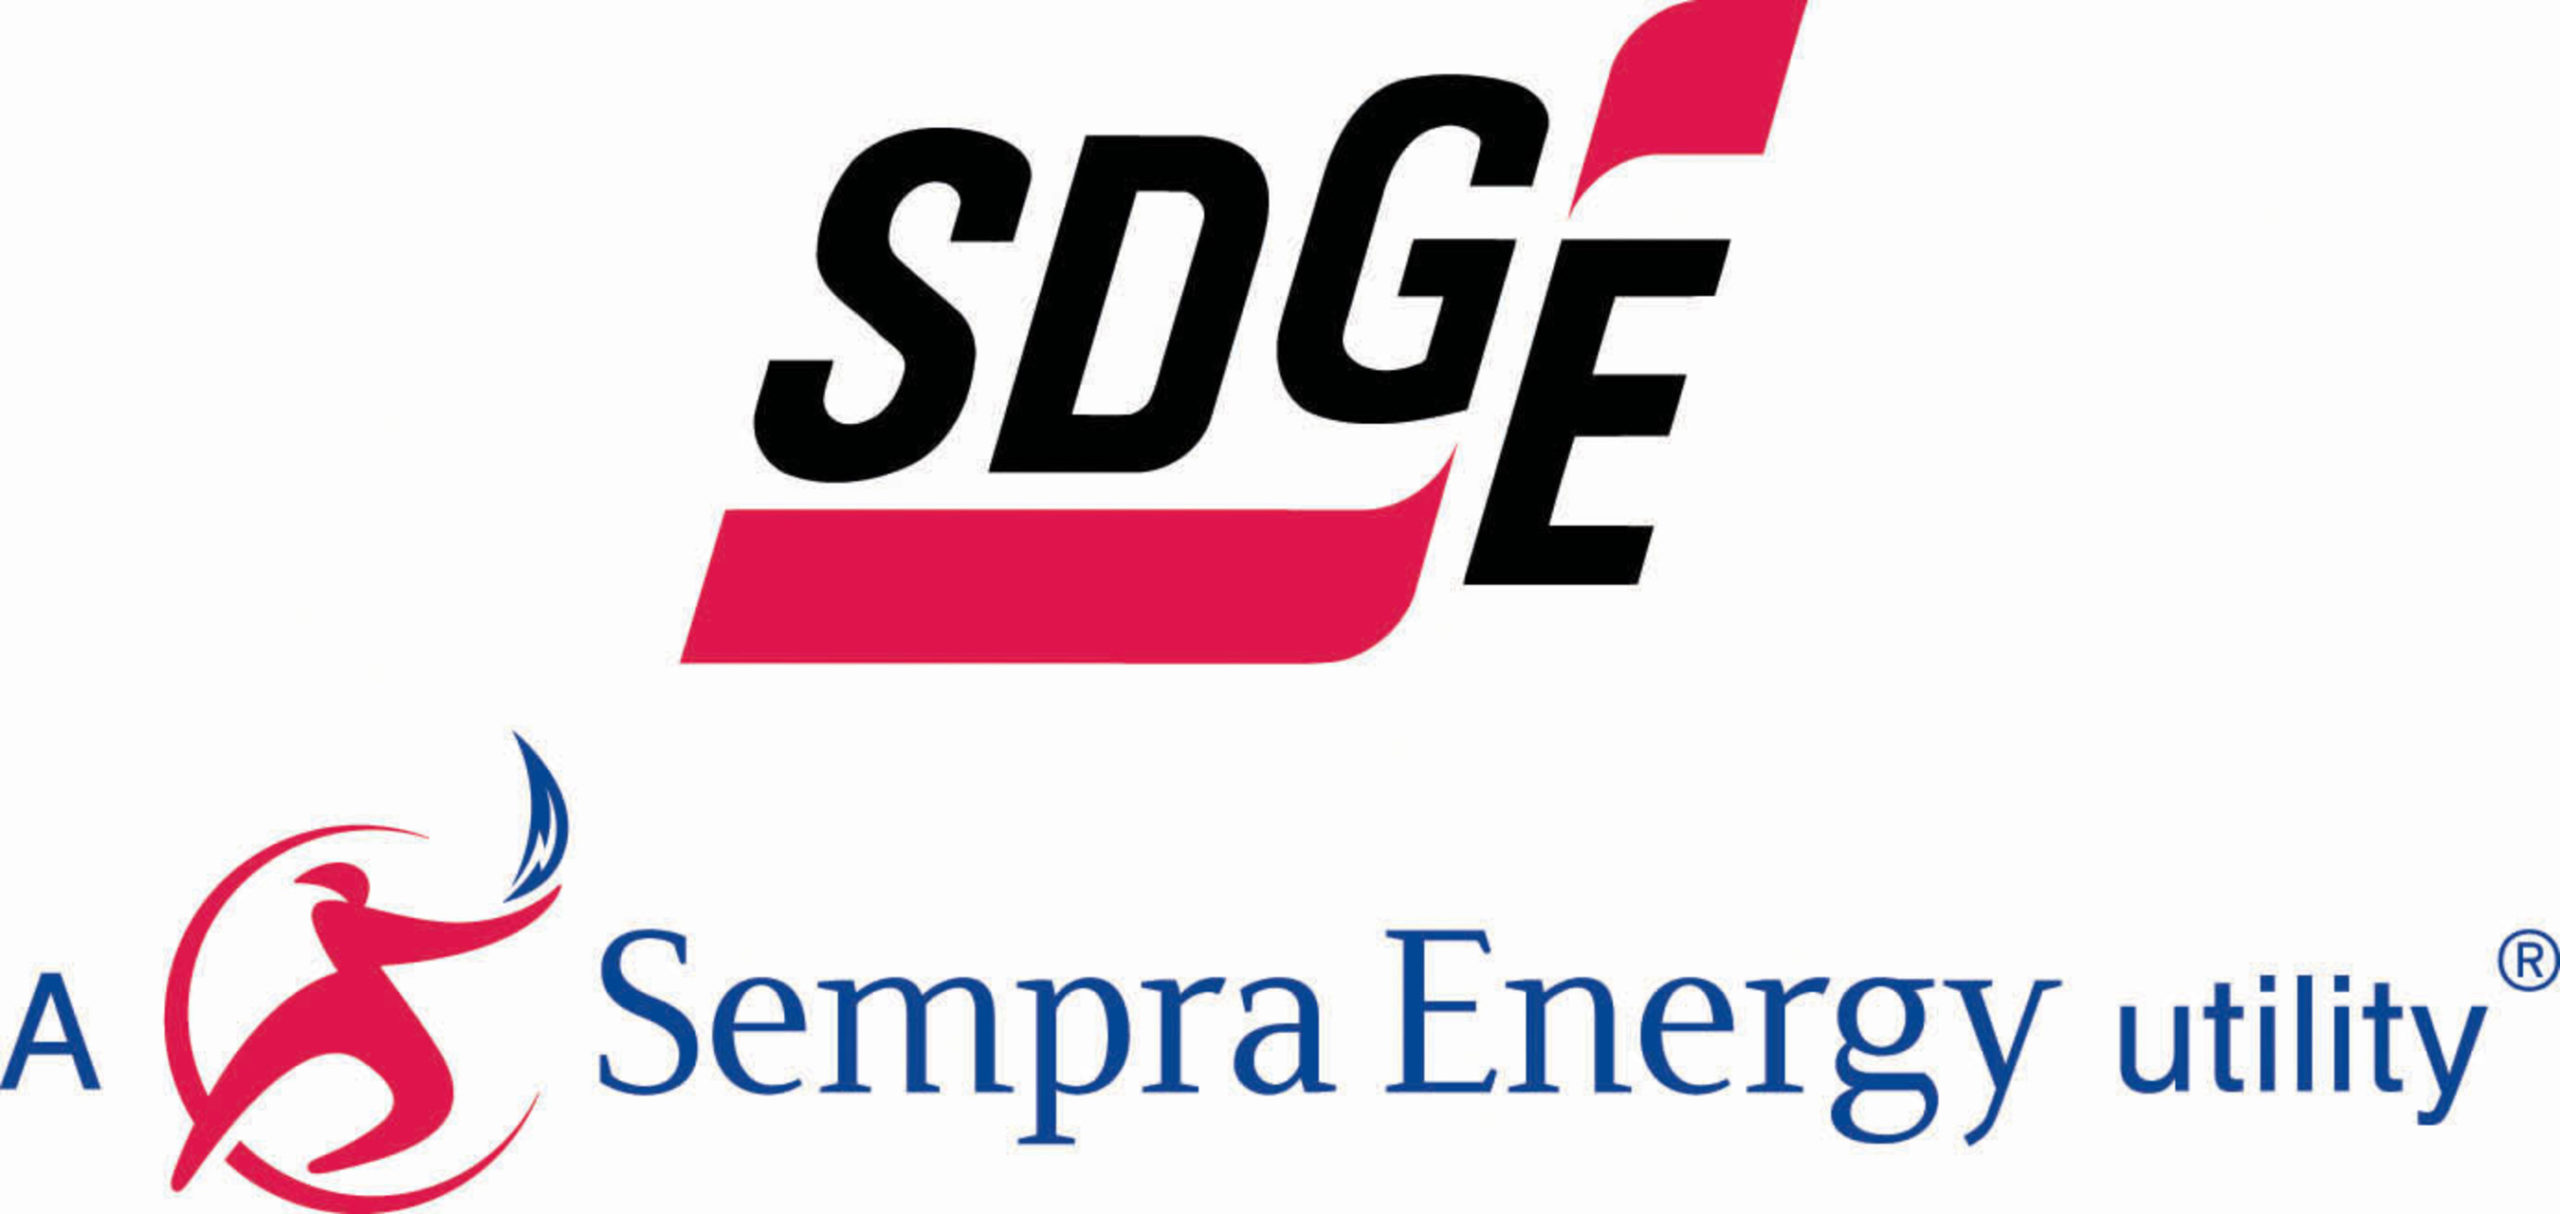 SDG&amp;E is a regulated public utility that provides safe and reliable energy service to 3.4 million consumers through 1.4 million electric meters and 861,000 natural gas meters in San Diego and southern Orange counties. The utility?s area spans 4,100 square miles. SDG&amp;E is committed to creating ways to help customers save energy and money every day. SDG&amp;E is a subsidiary of Sempra Energy (NYSE: SRE), a Fortune 500 energy services holding company based in San Diego. Connect with SDG&amp;E?s Customer Contact Center at 800-411-7343, on Twitter (@SDGE) and Facebook. (PRNewsFoto/SDG&amp;E)